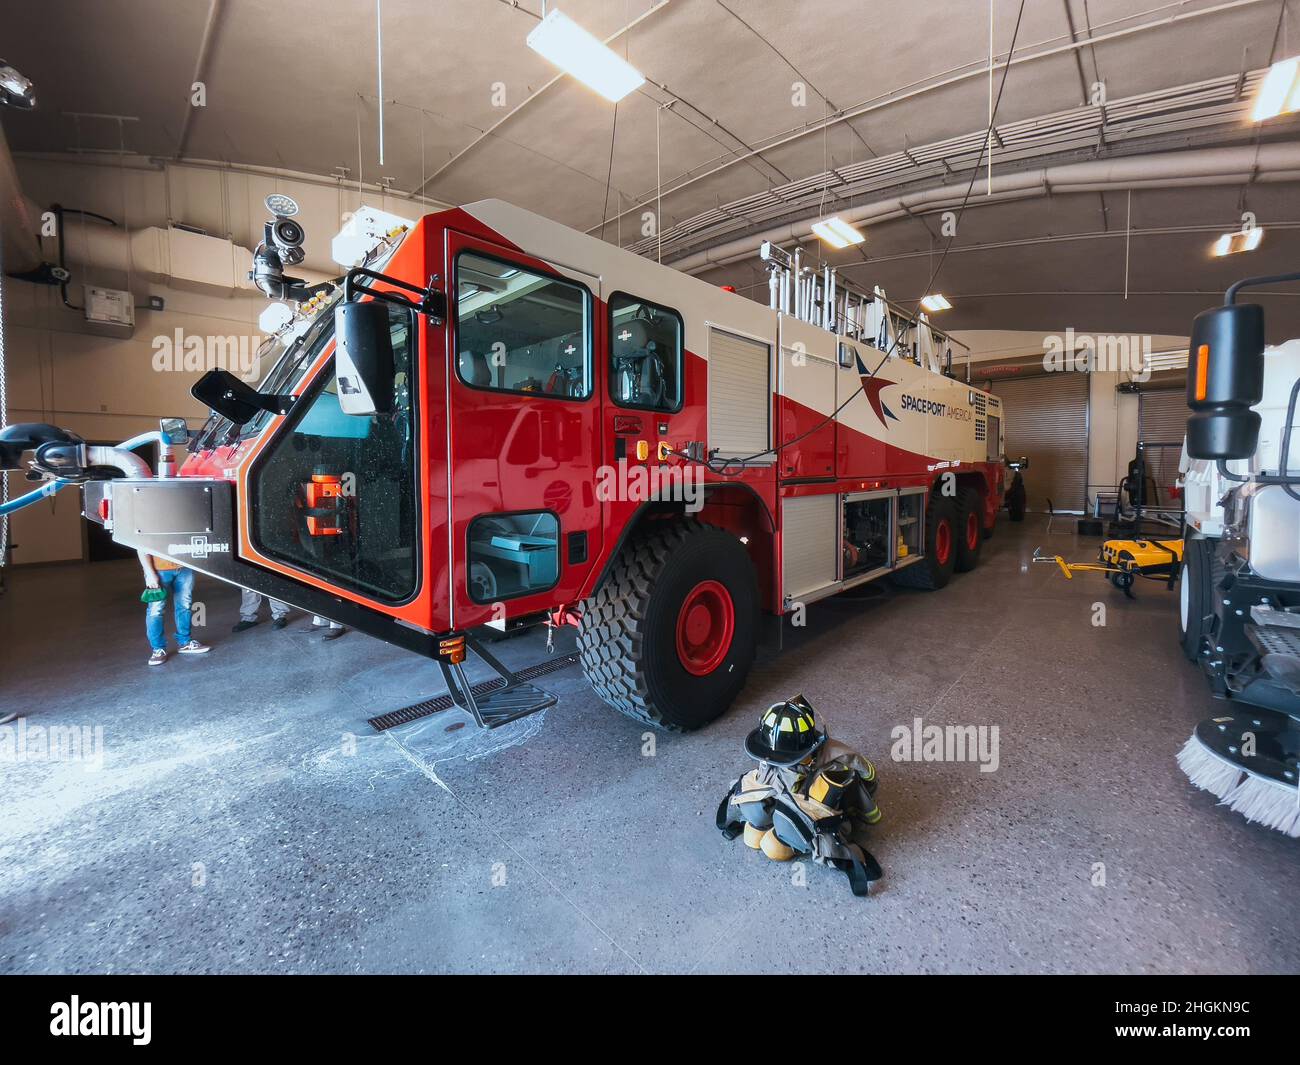 An Oshkosh Striker 6x6 airport fire truck at Spaceport America, a an airport used for space flights (such as Virgin Galactic) in rural New Mexico, USA Stock Photo